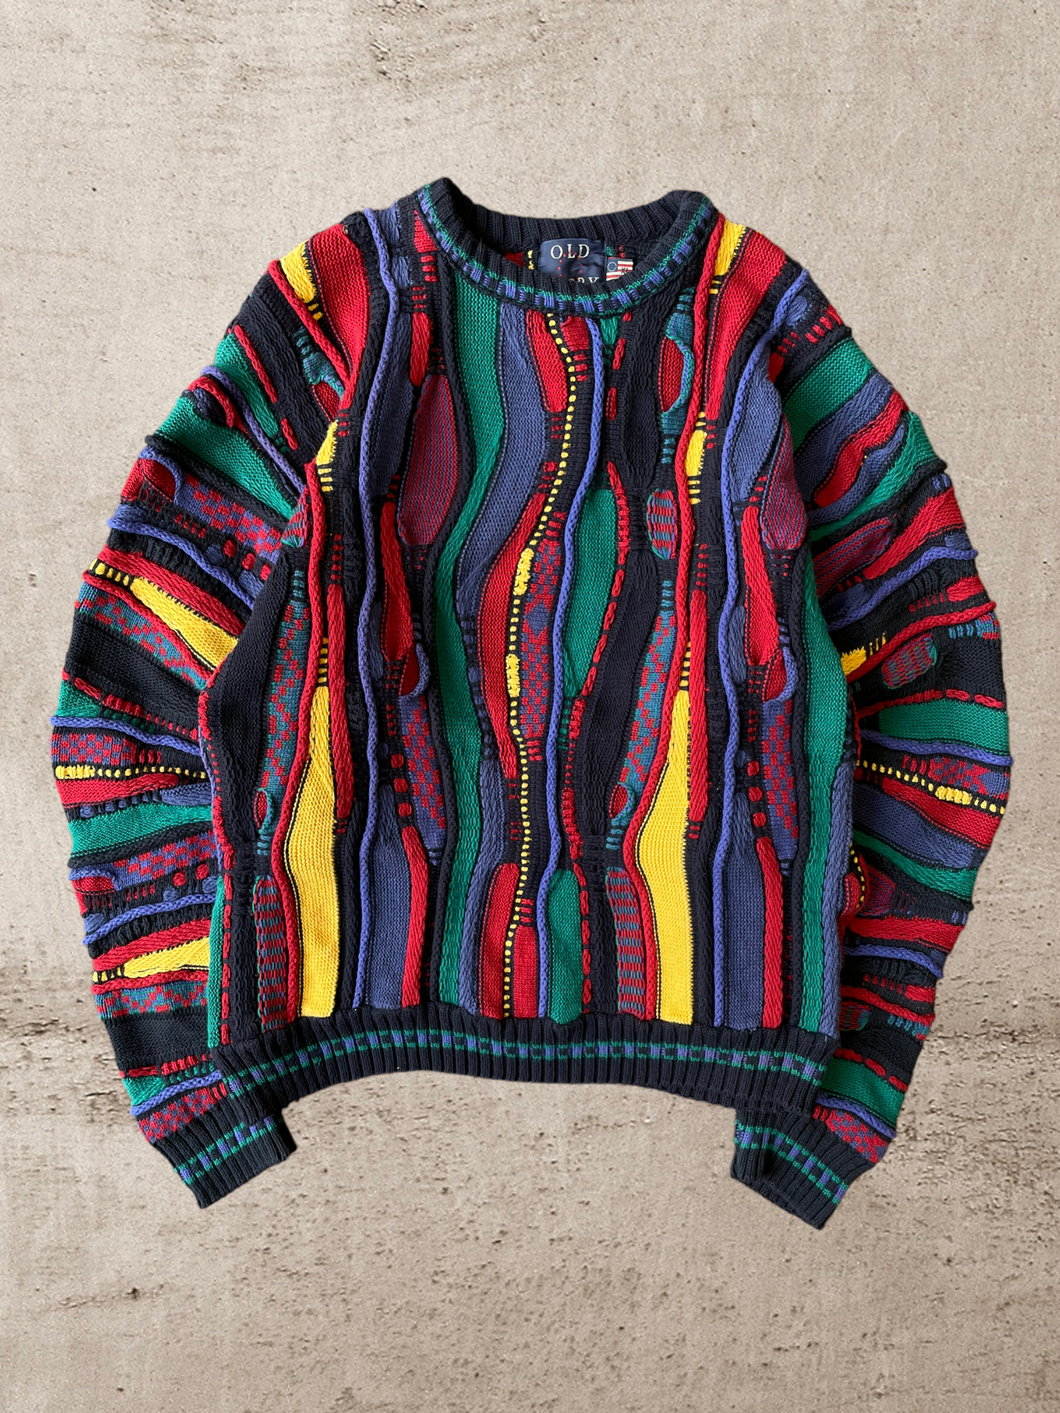 90s Multicolor Intricate Knit Sweater - X-Large